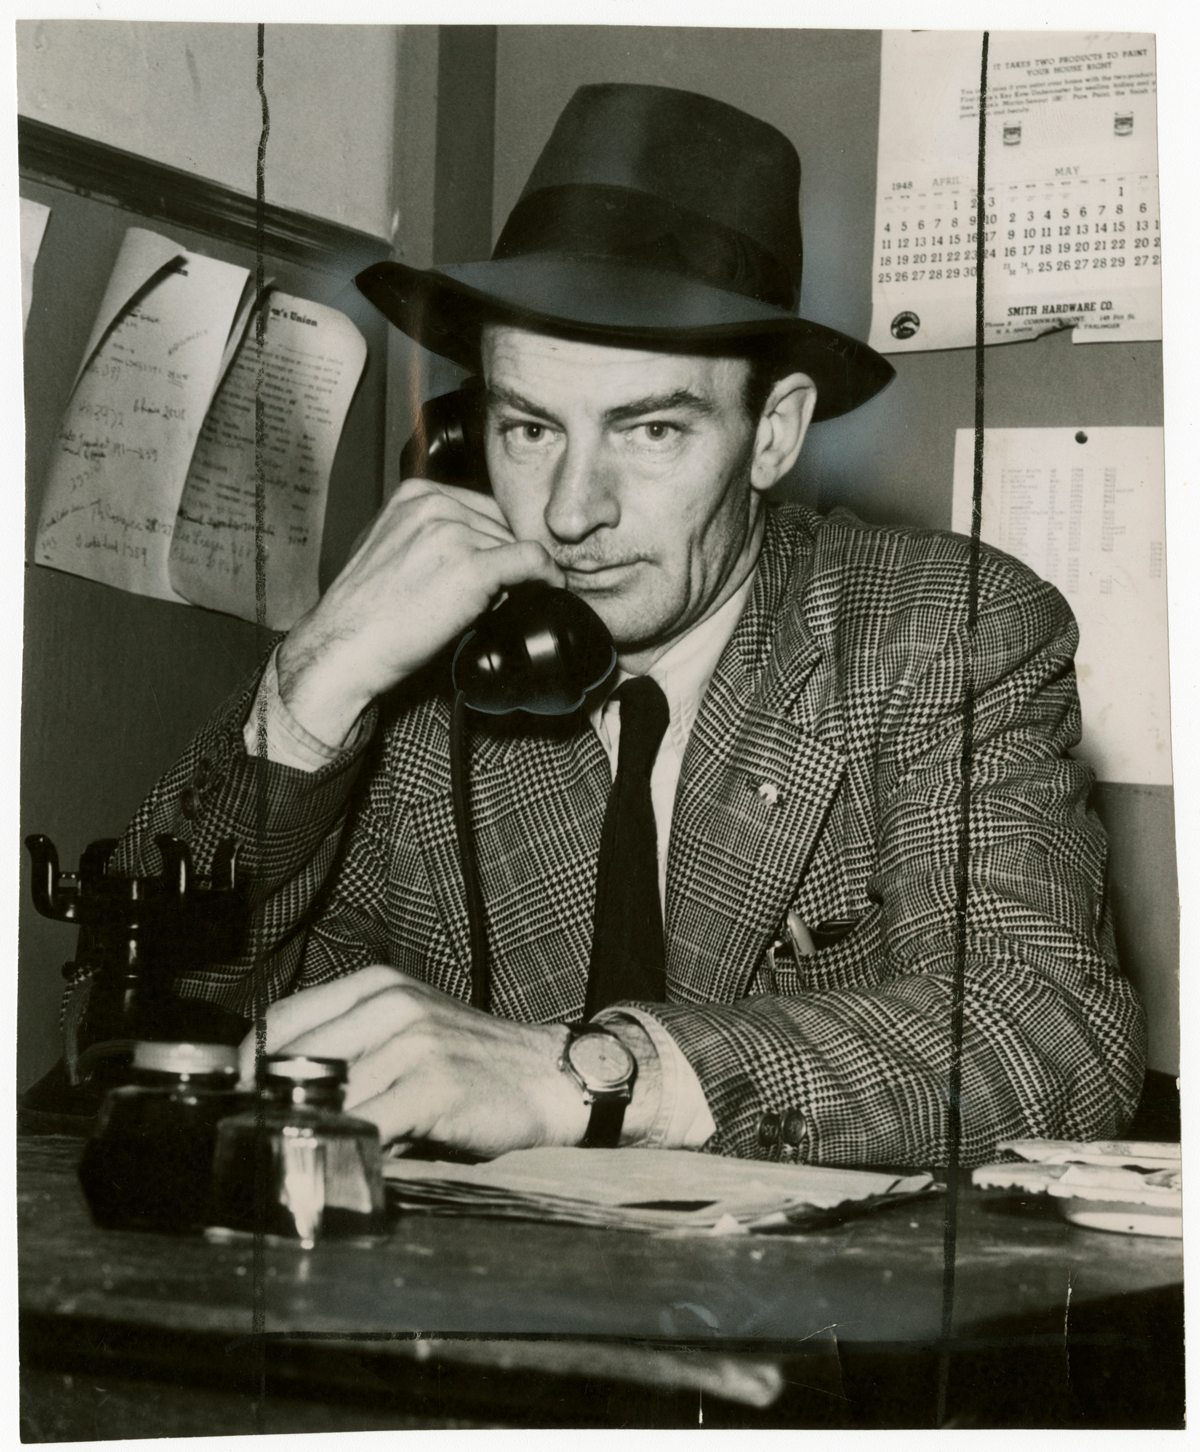     Unidentified photographer, Milton ‘Buzz’ Nuttall, Canadian Seamen’s Union business agent, in Moose Hall, Cornwall, Ontario, 1948. Gelatin silver print, 1948. Gift of The Globe and Mail newspaper to the Canadian Photography Institute of the National Gallery of Canada.

